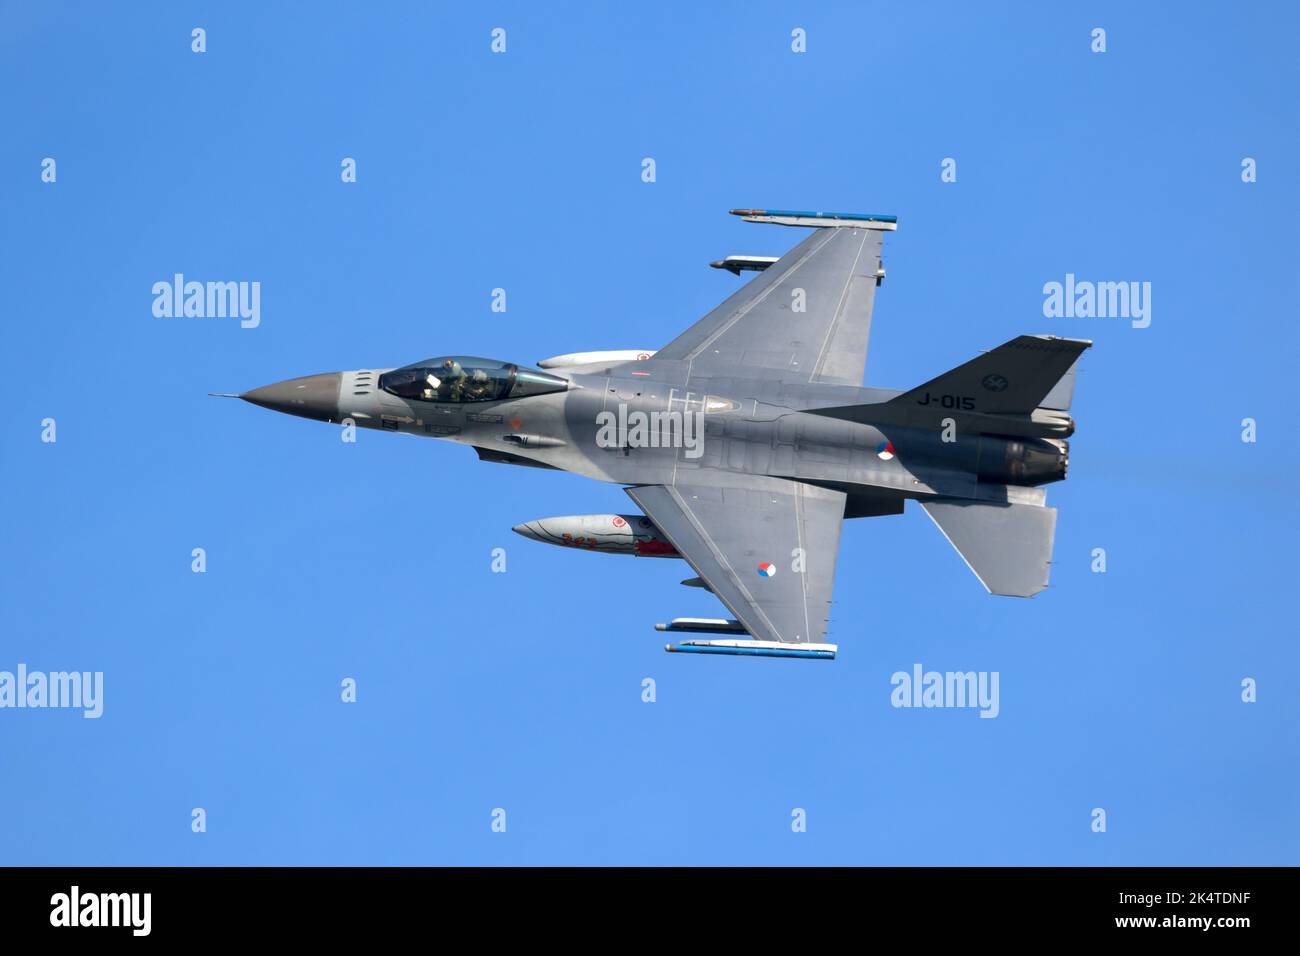 Royal Netherlands Air Force F-16 fighter jet in flight at Leeuwarden Air Base. The Netherlands - April 19, 2018 Stock Photo